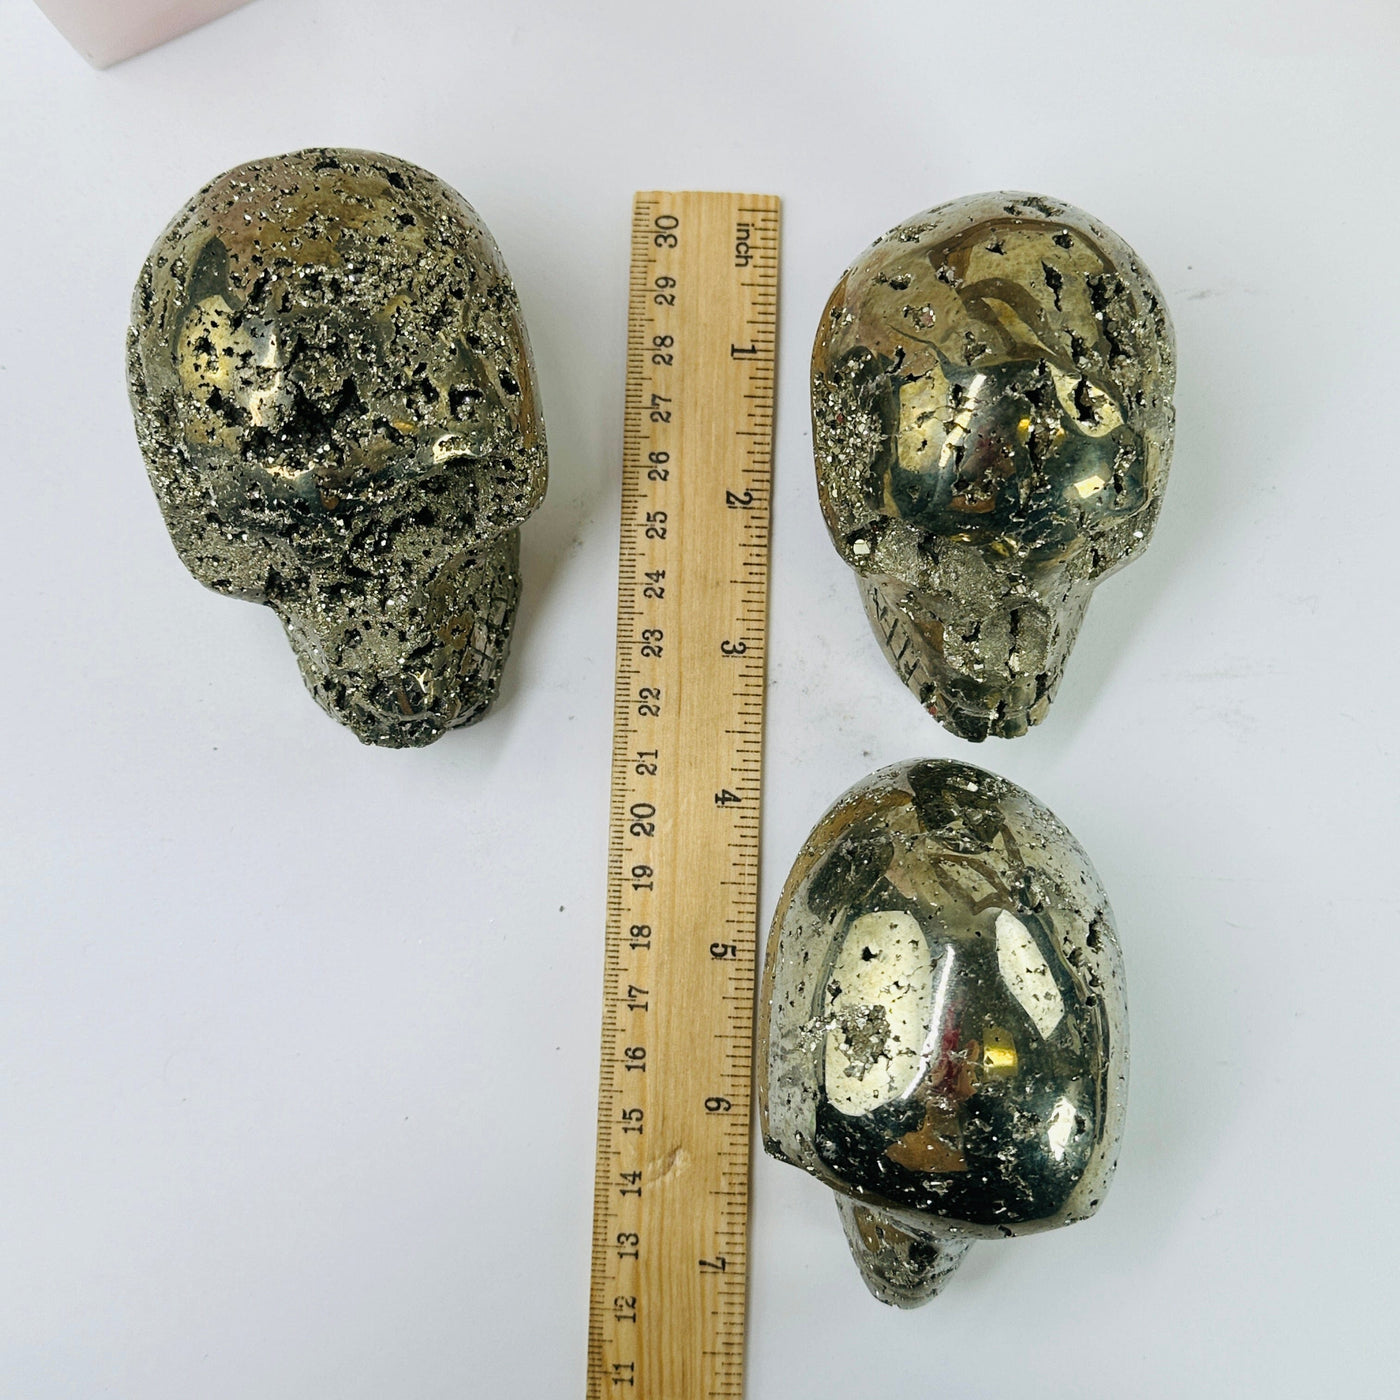 pyrite skulls next to a ruler for size reference